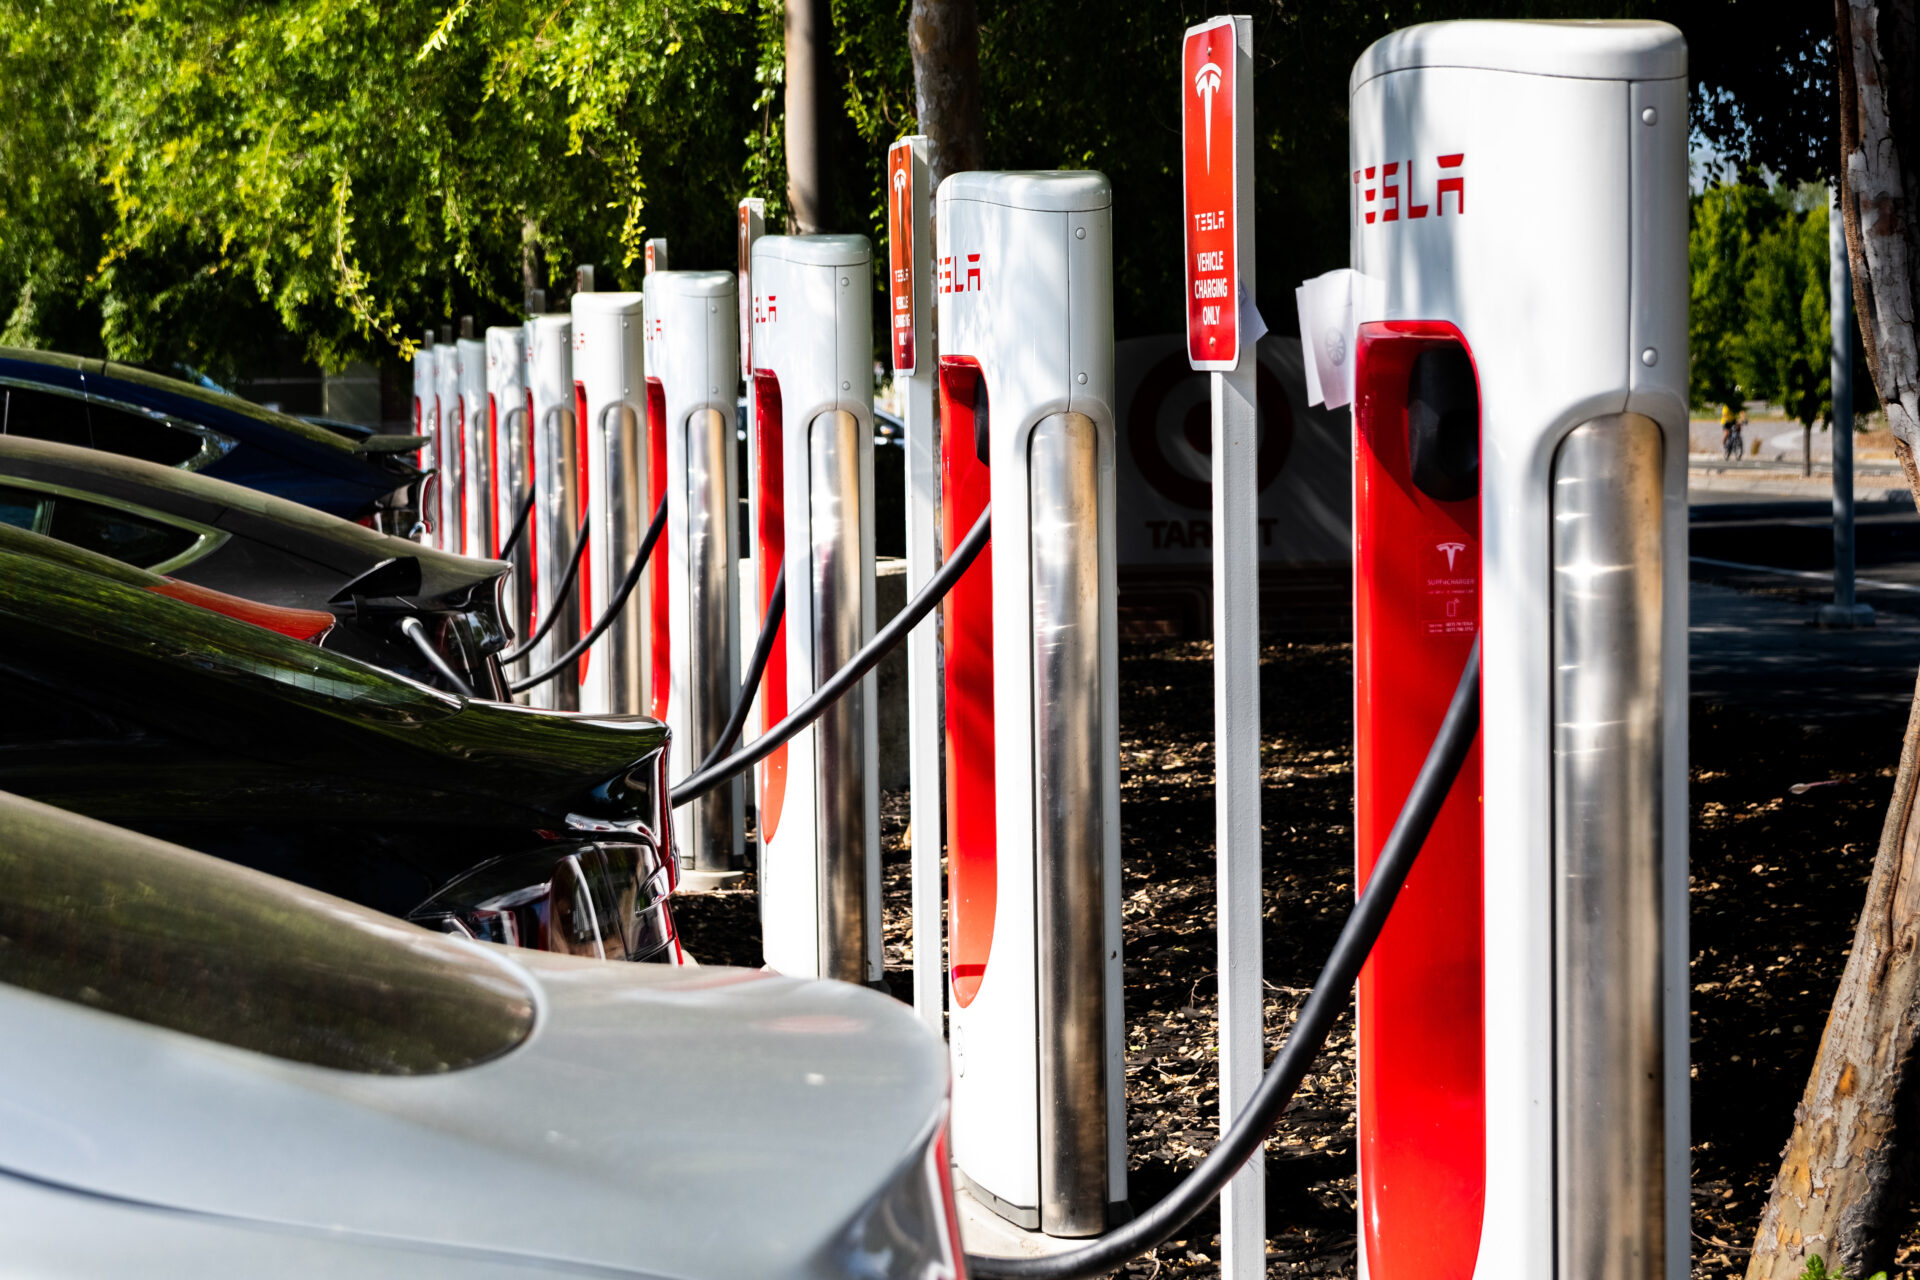 May 5, 2019 San Jose / CA / USA - Tesla vehicles plugged in at a charging station in south San Francisco bay area; Silicon Valley